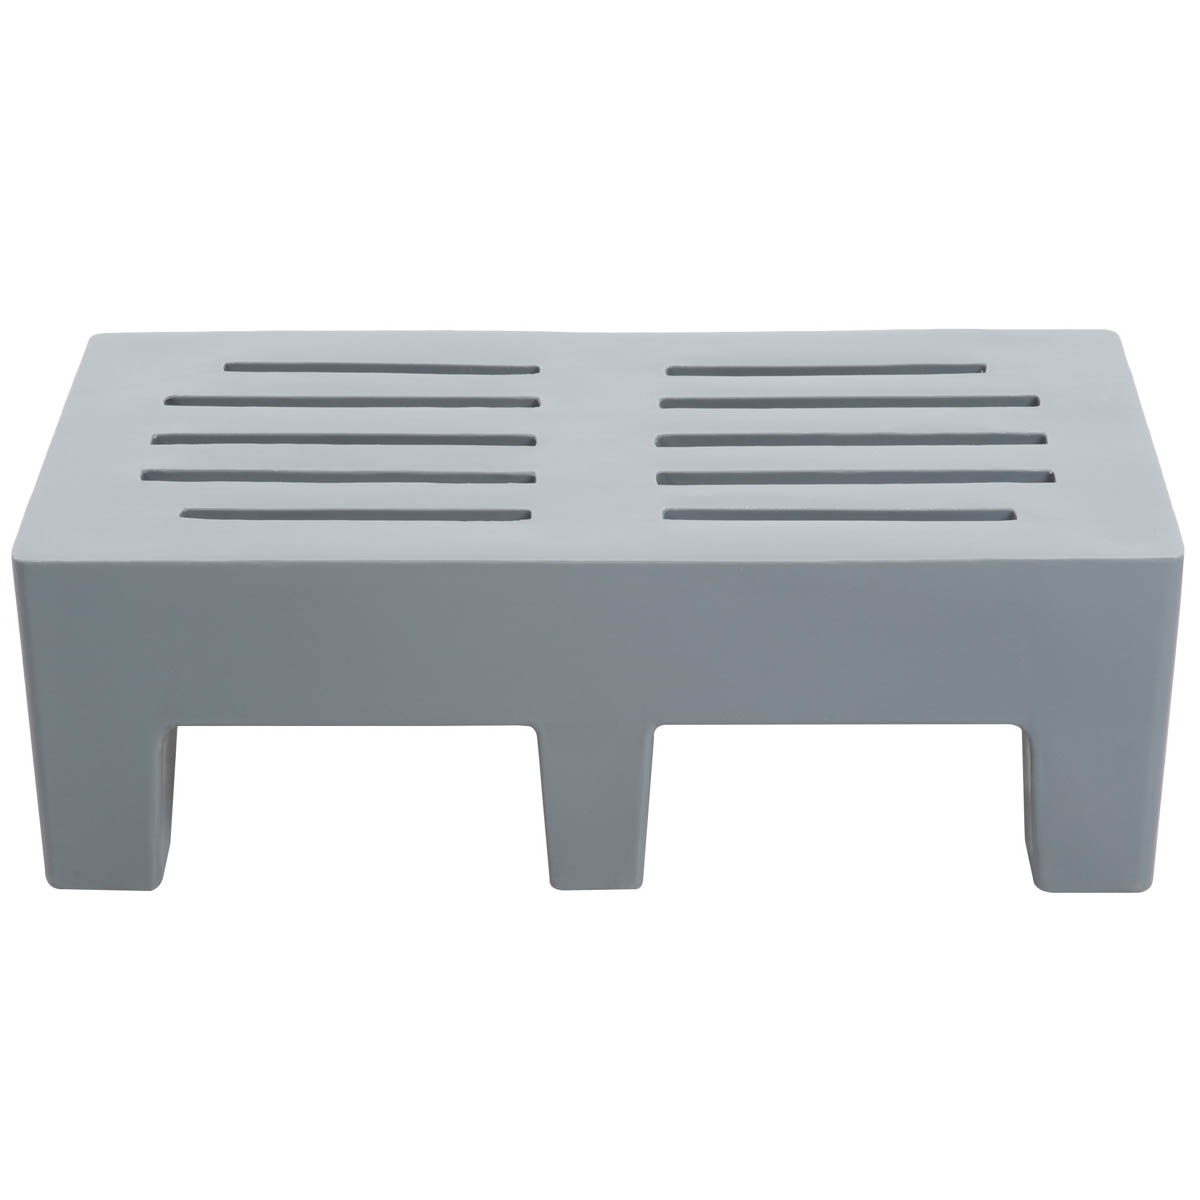 Winholt PLSQ-3-1222-GY 36″ Vented Dunnage Rack